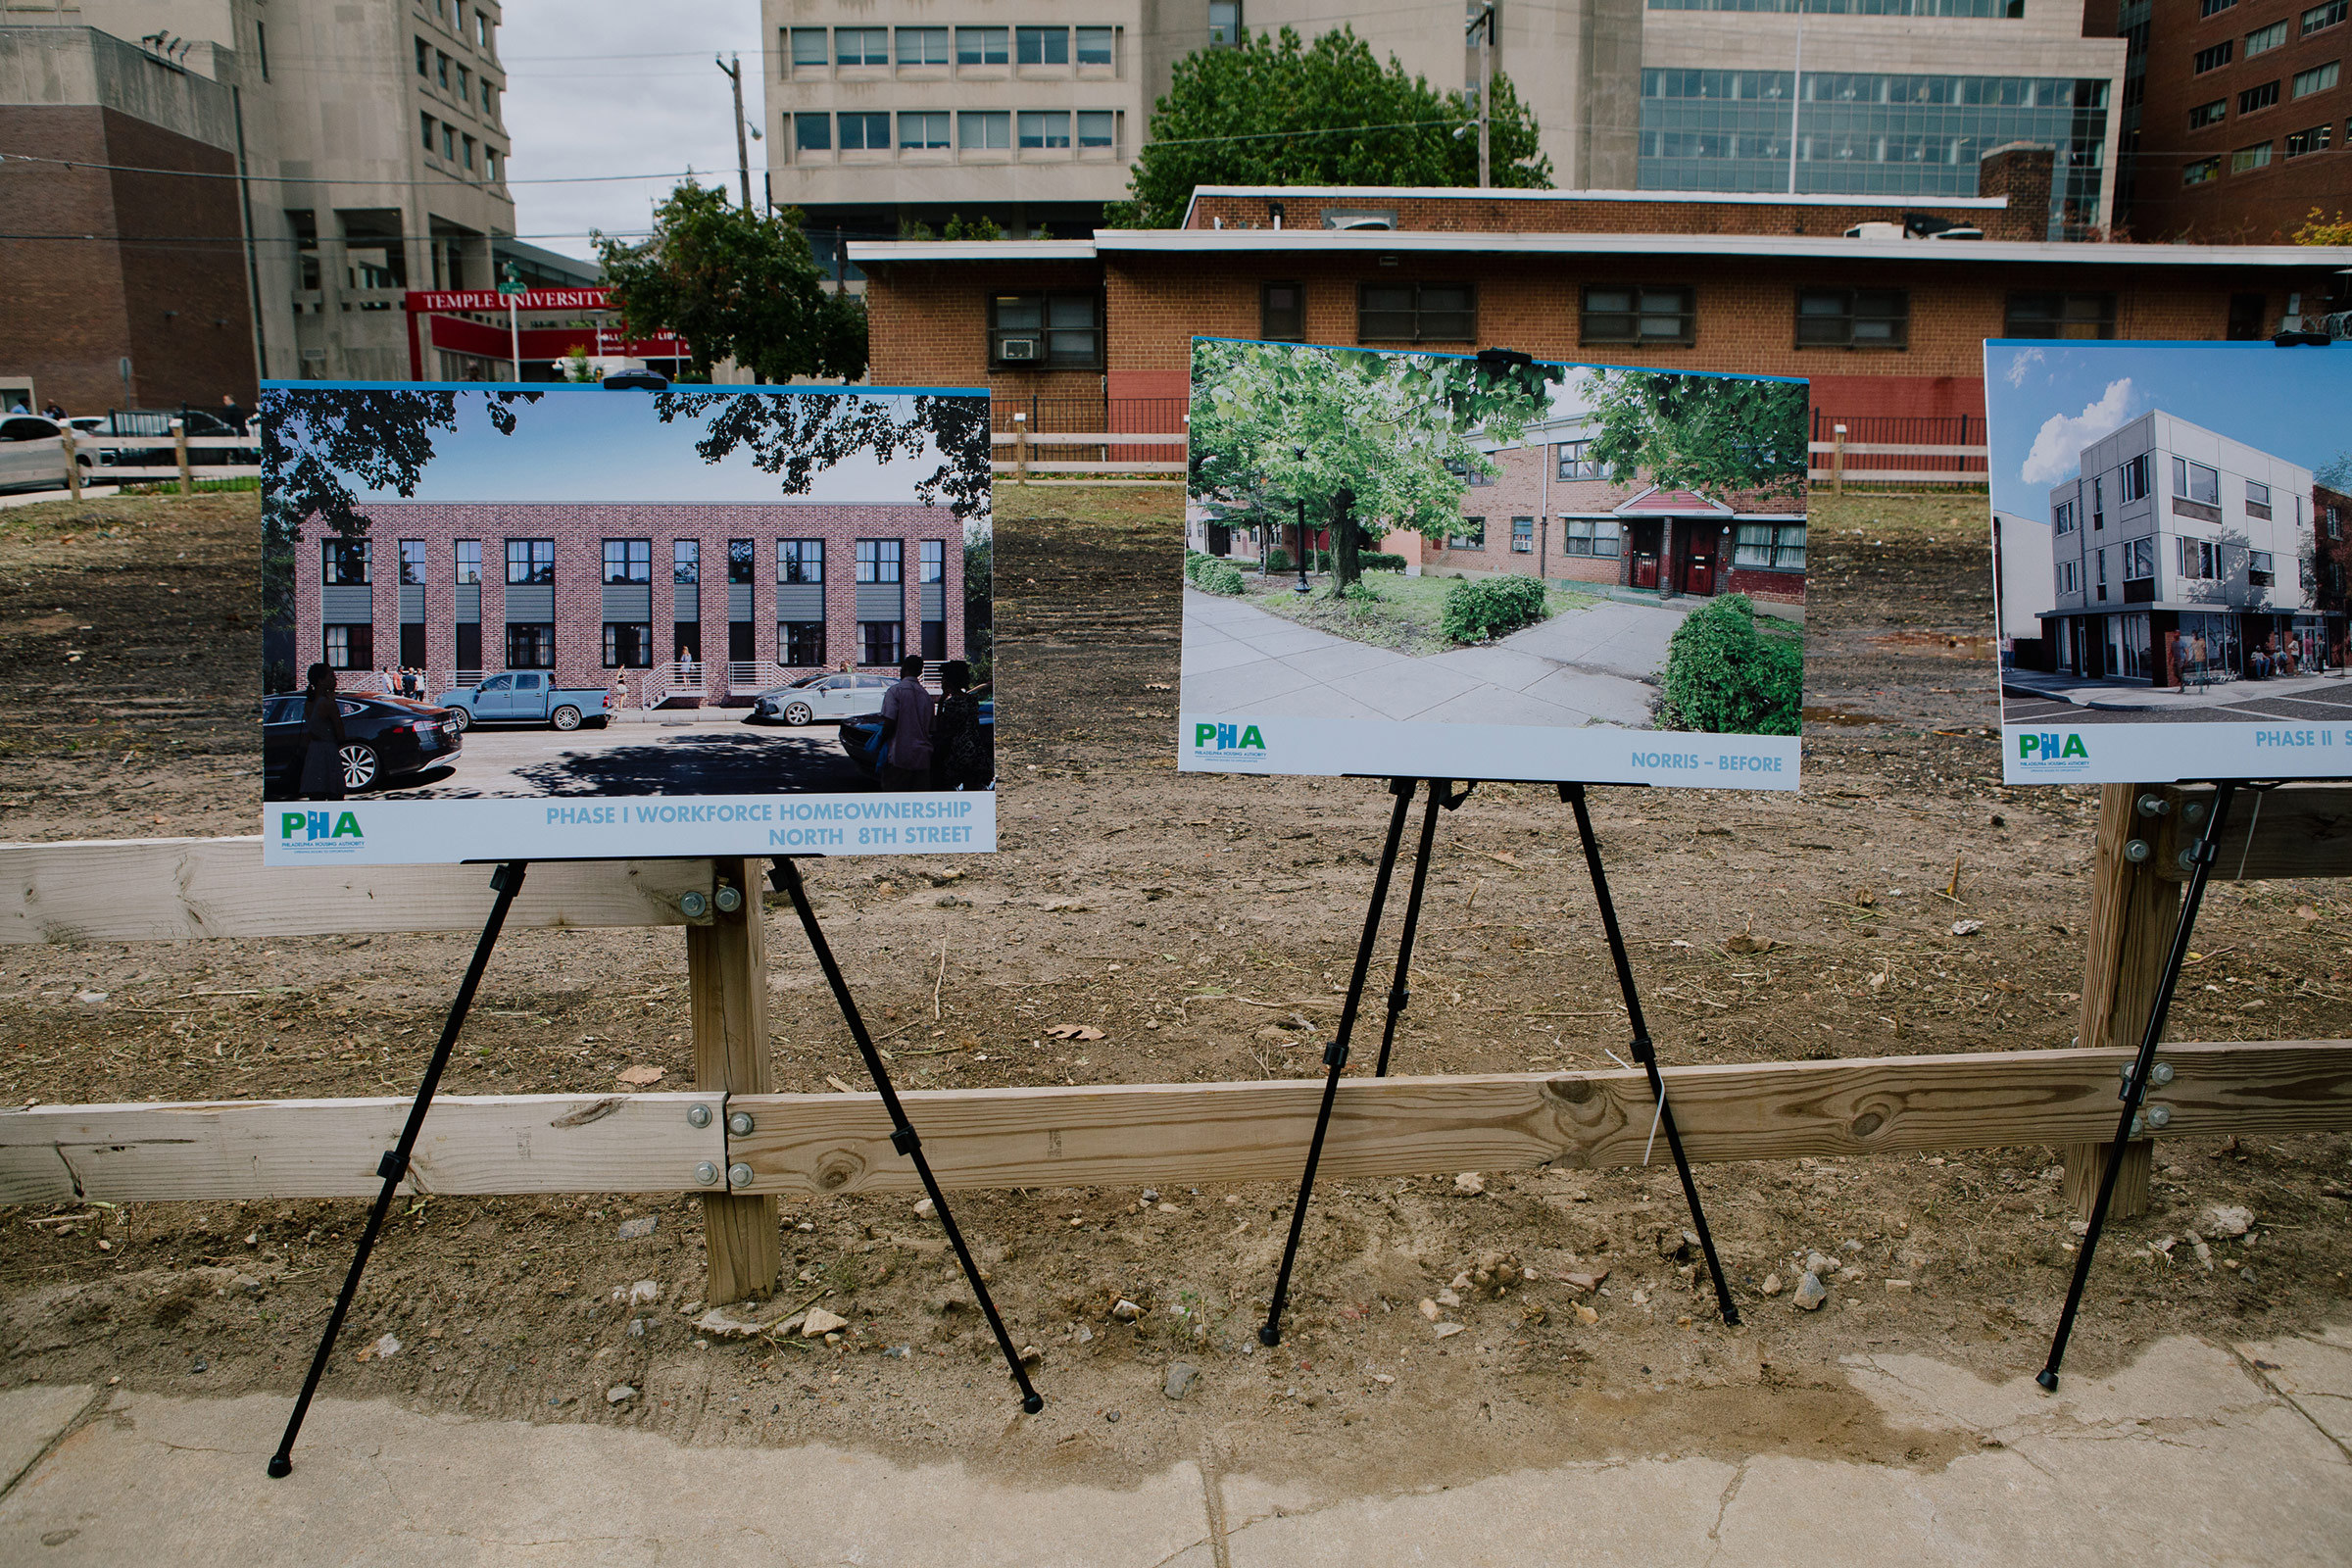 Illustrations show how a grant from HUD will transform 1950s projects into mixed-income units in Philadelphia (Michelle Gustafson for TIME)